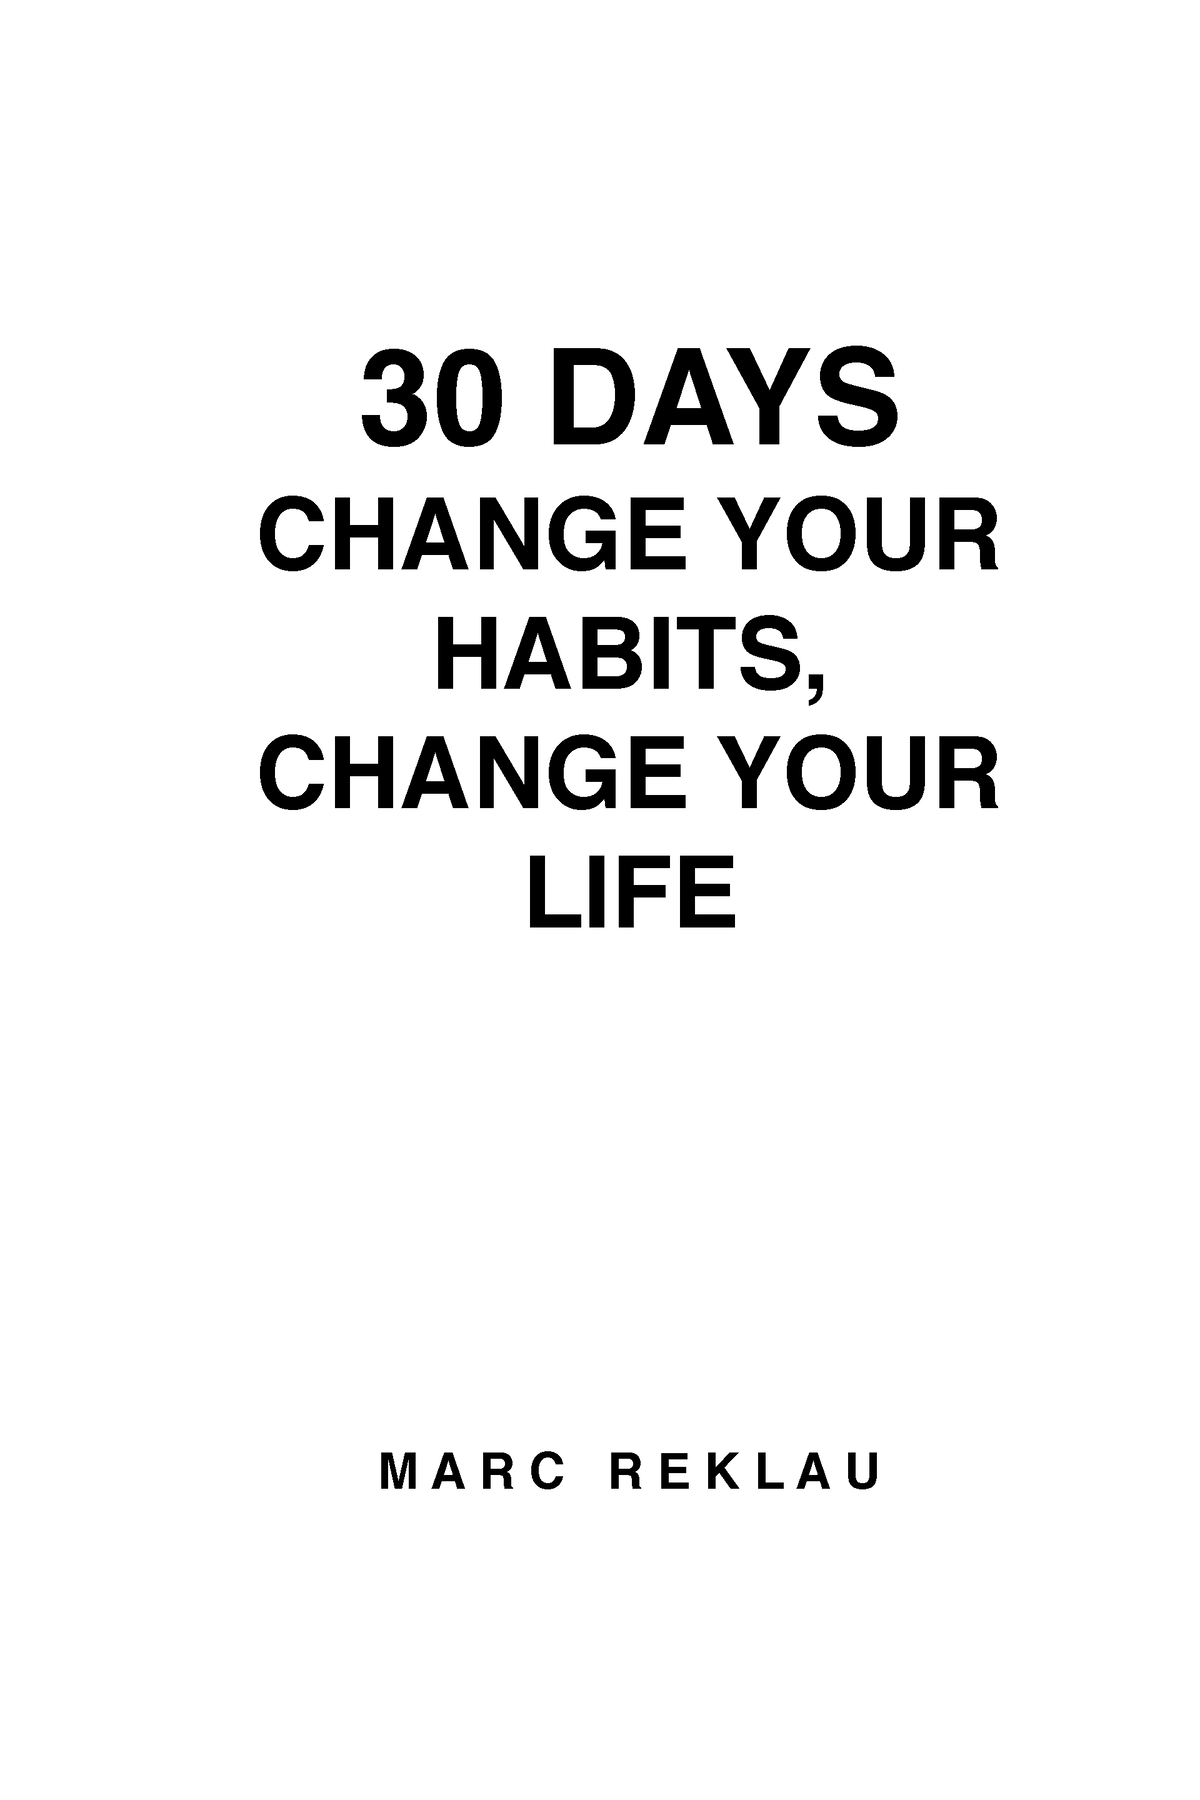 pdfcoffee-books-for-reading-to-enhance-relationships-30-days-change